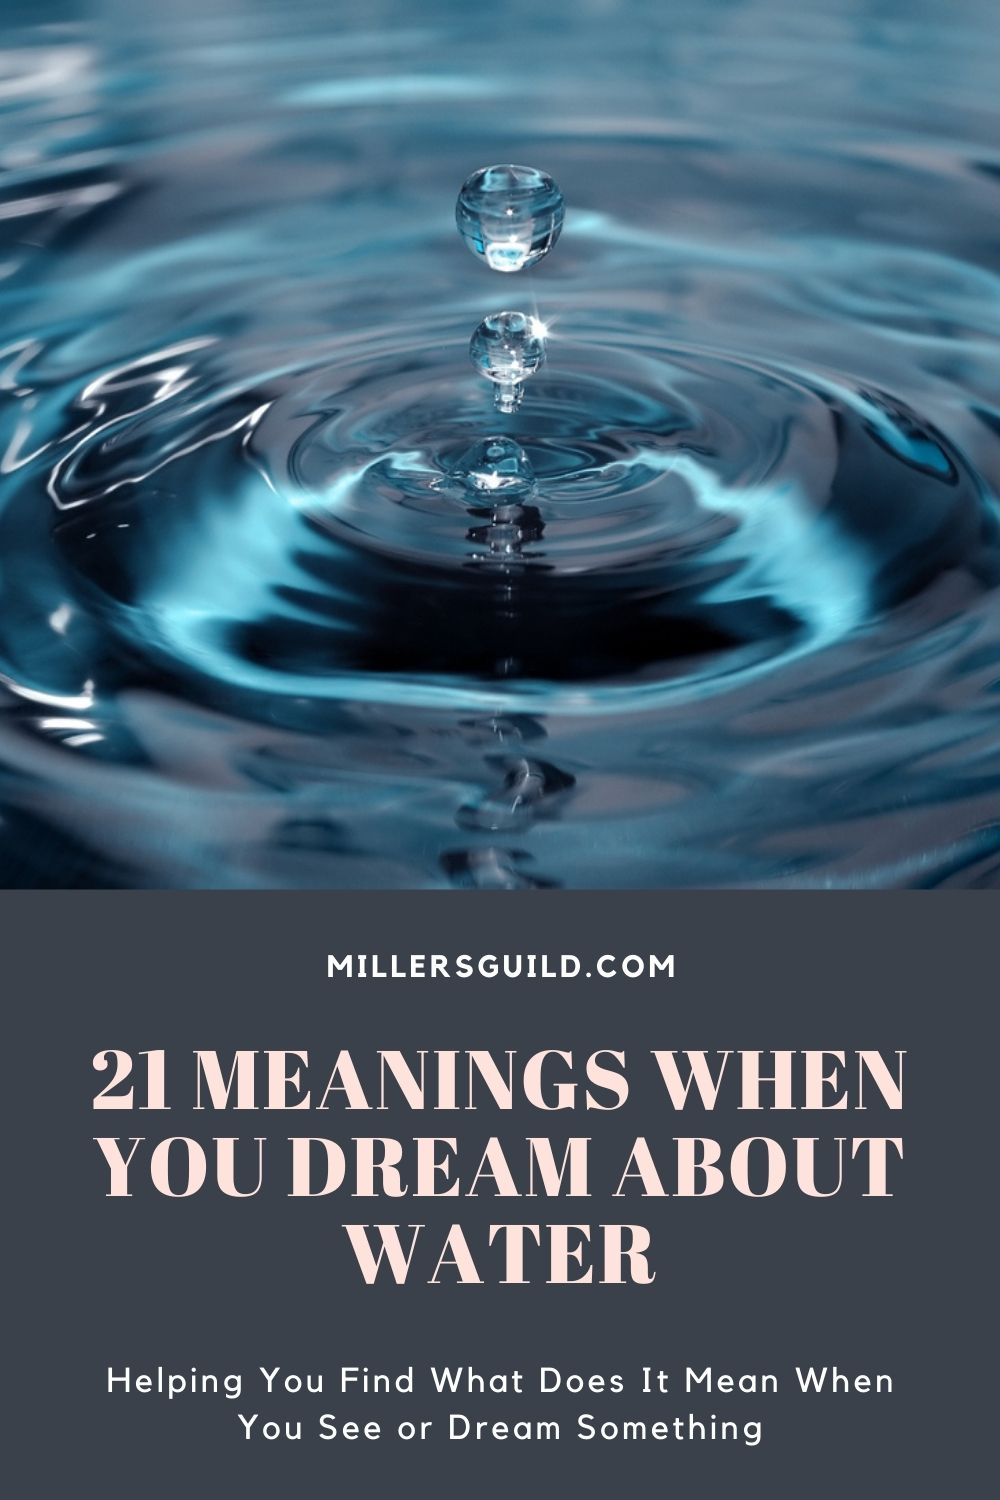 2 Examples Of Running Water Dreams